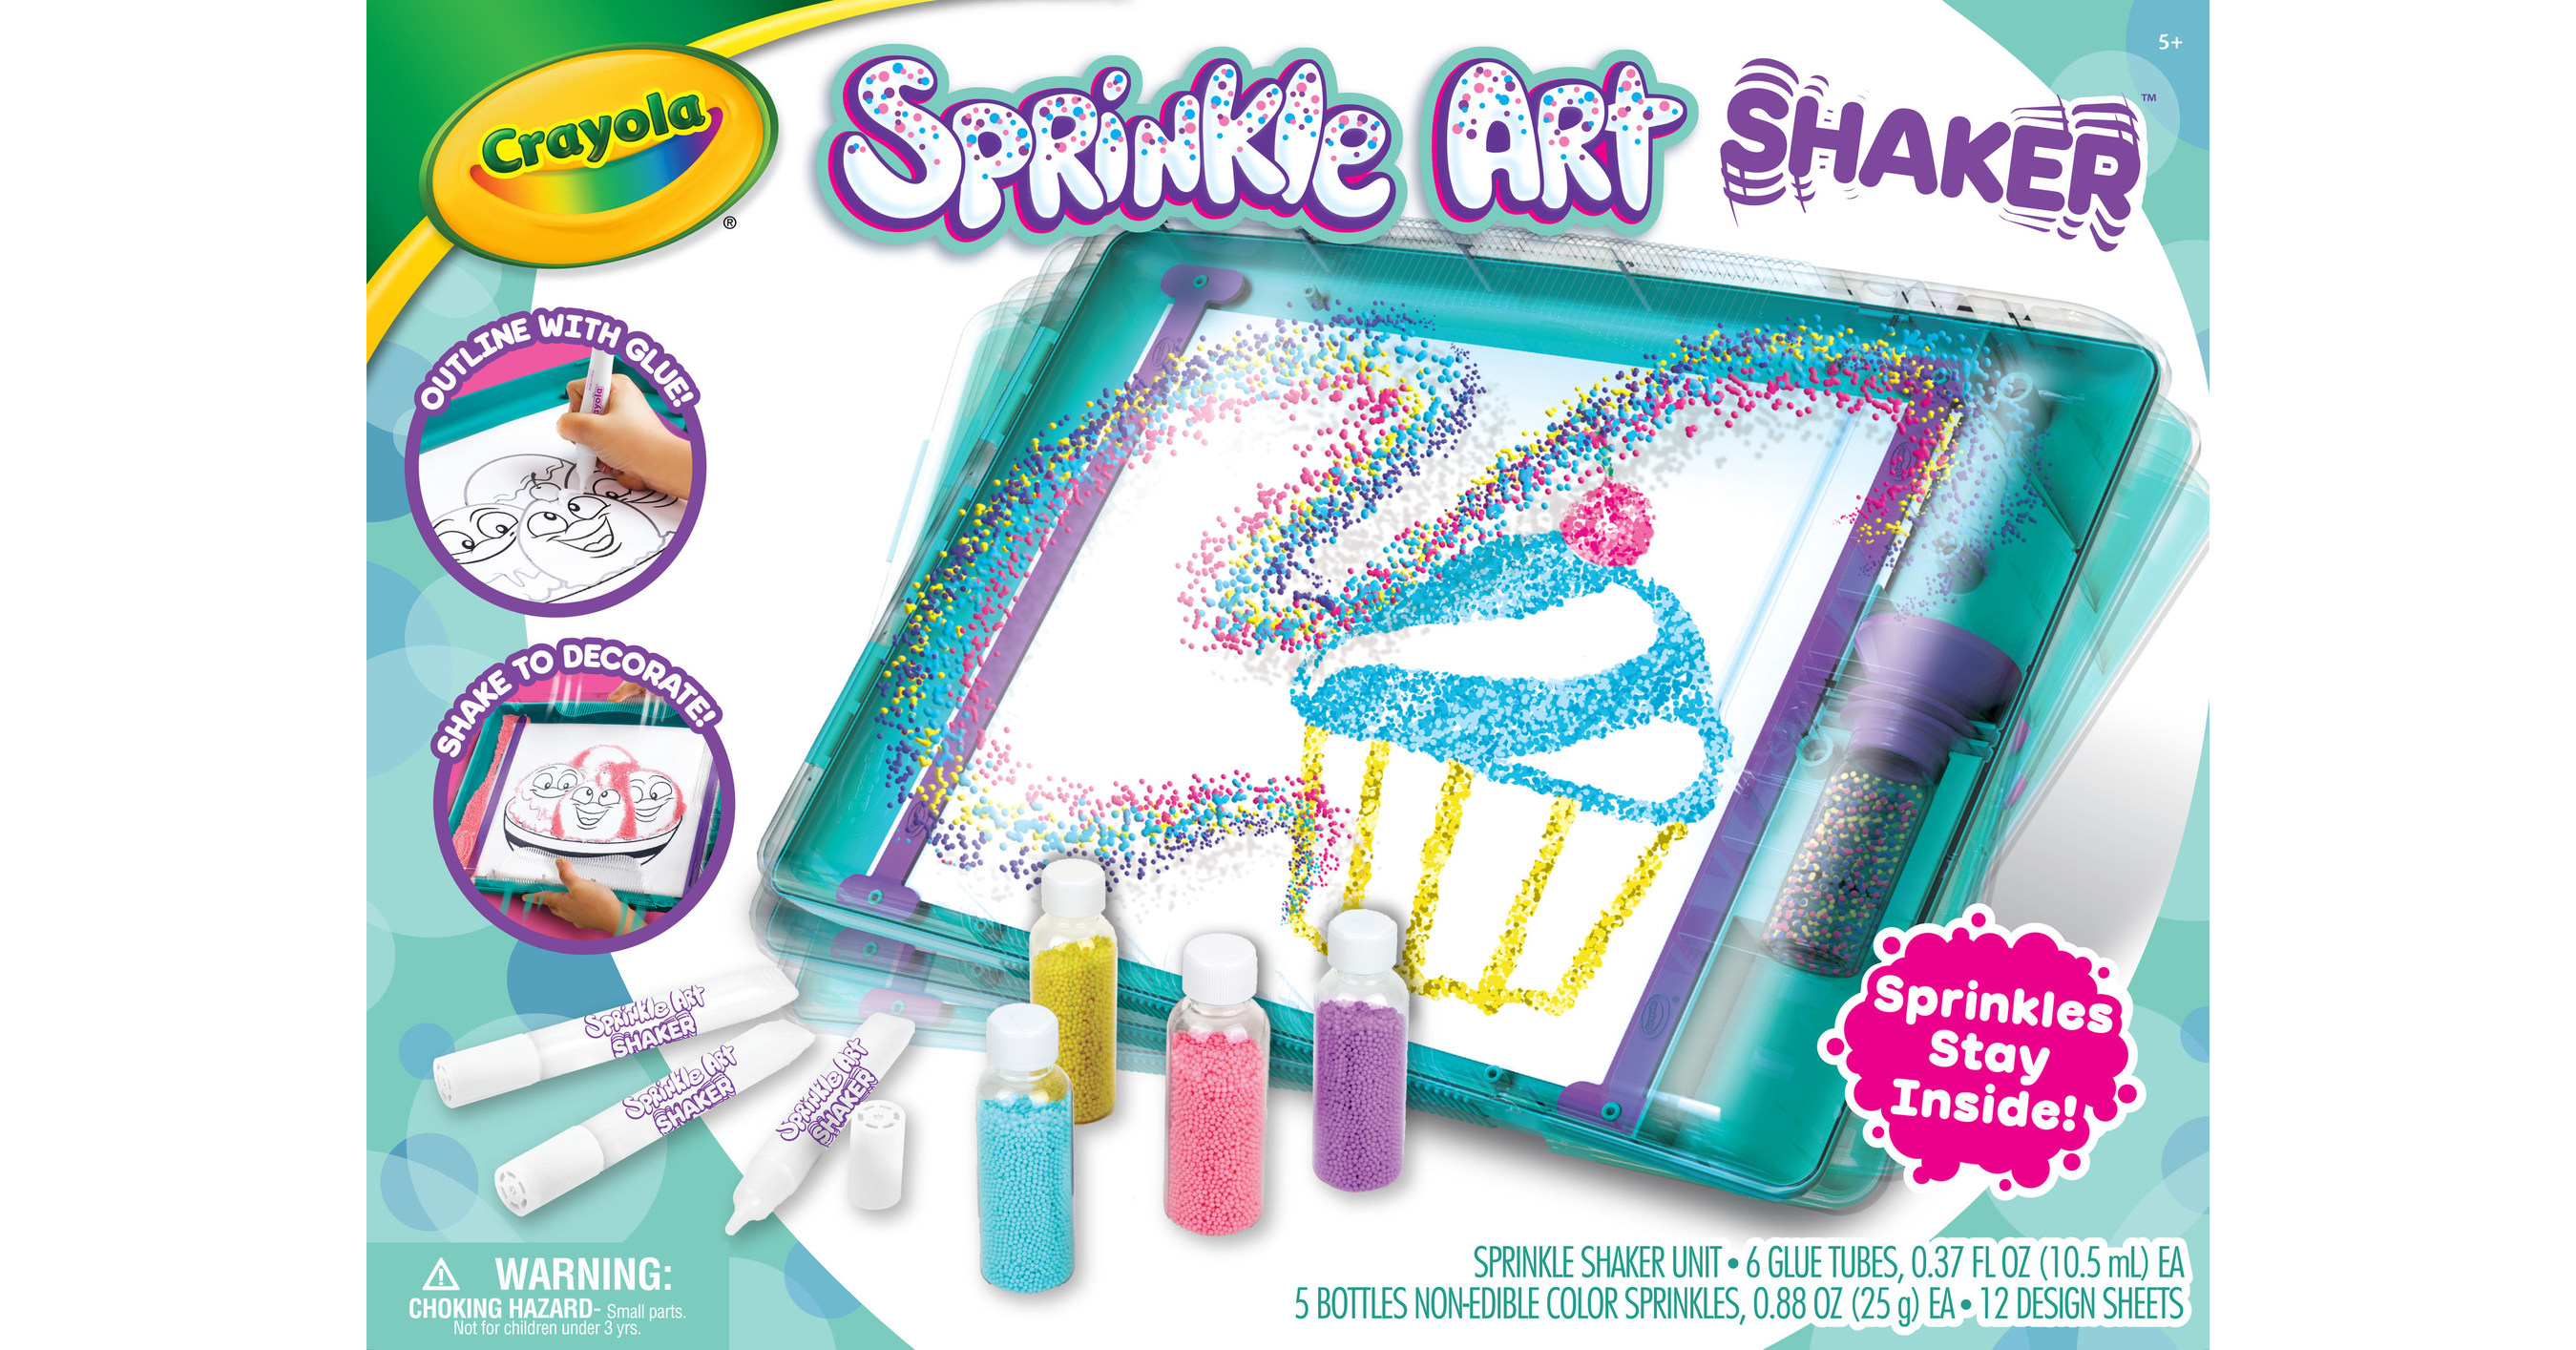 Crayola Infuses Sprinkles, Sparkle and Safari into its 2019 Holiday Line-Up